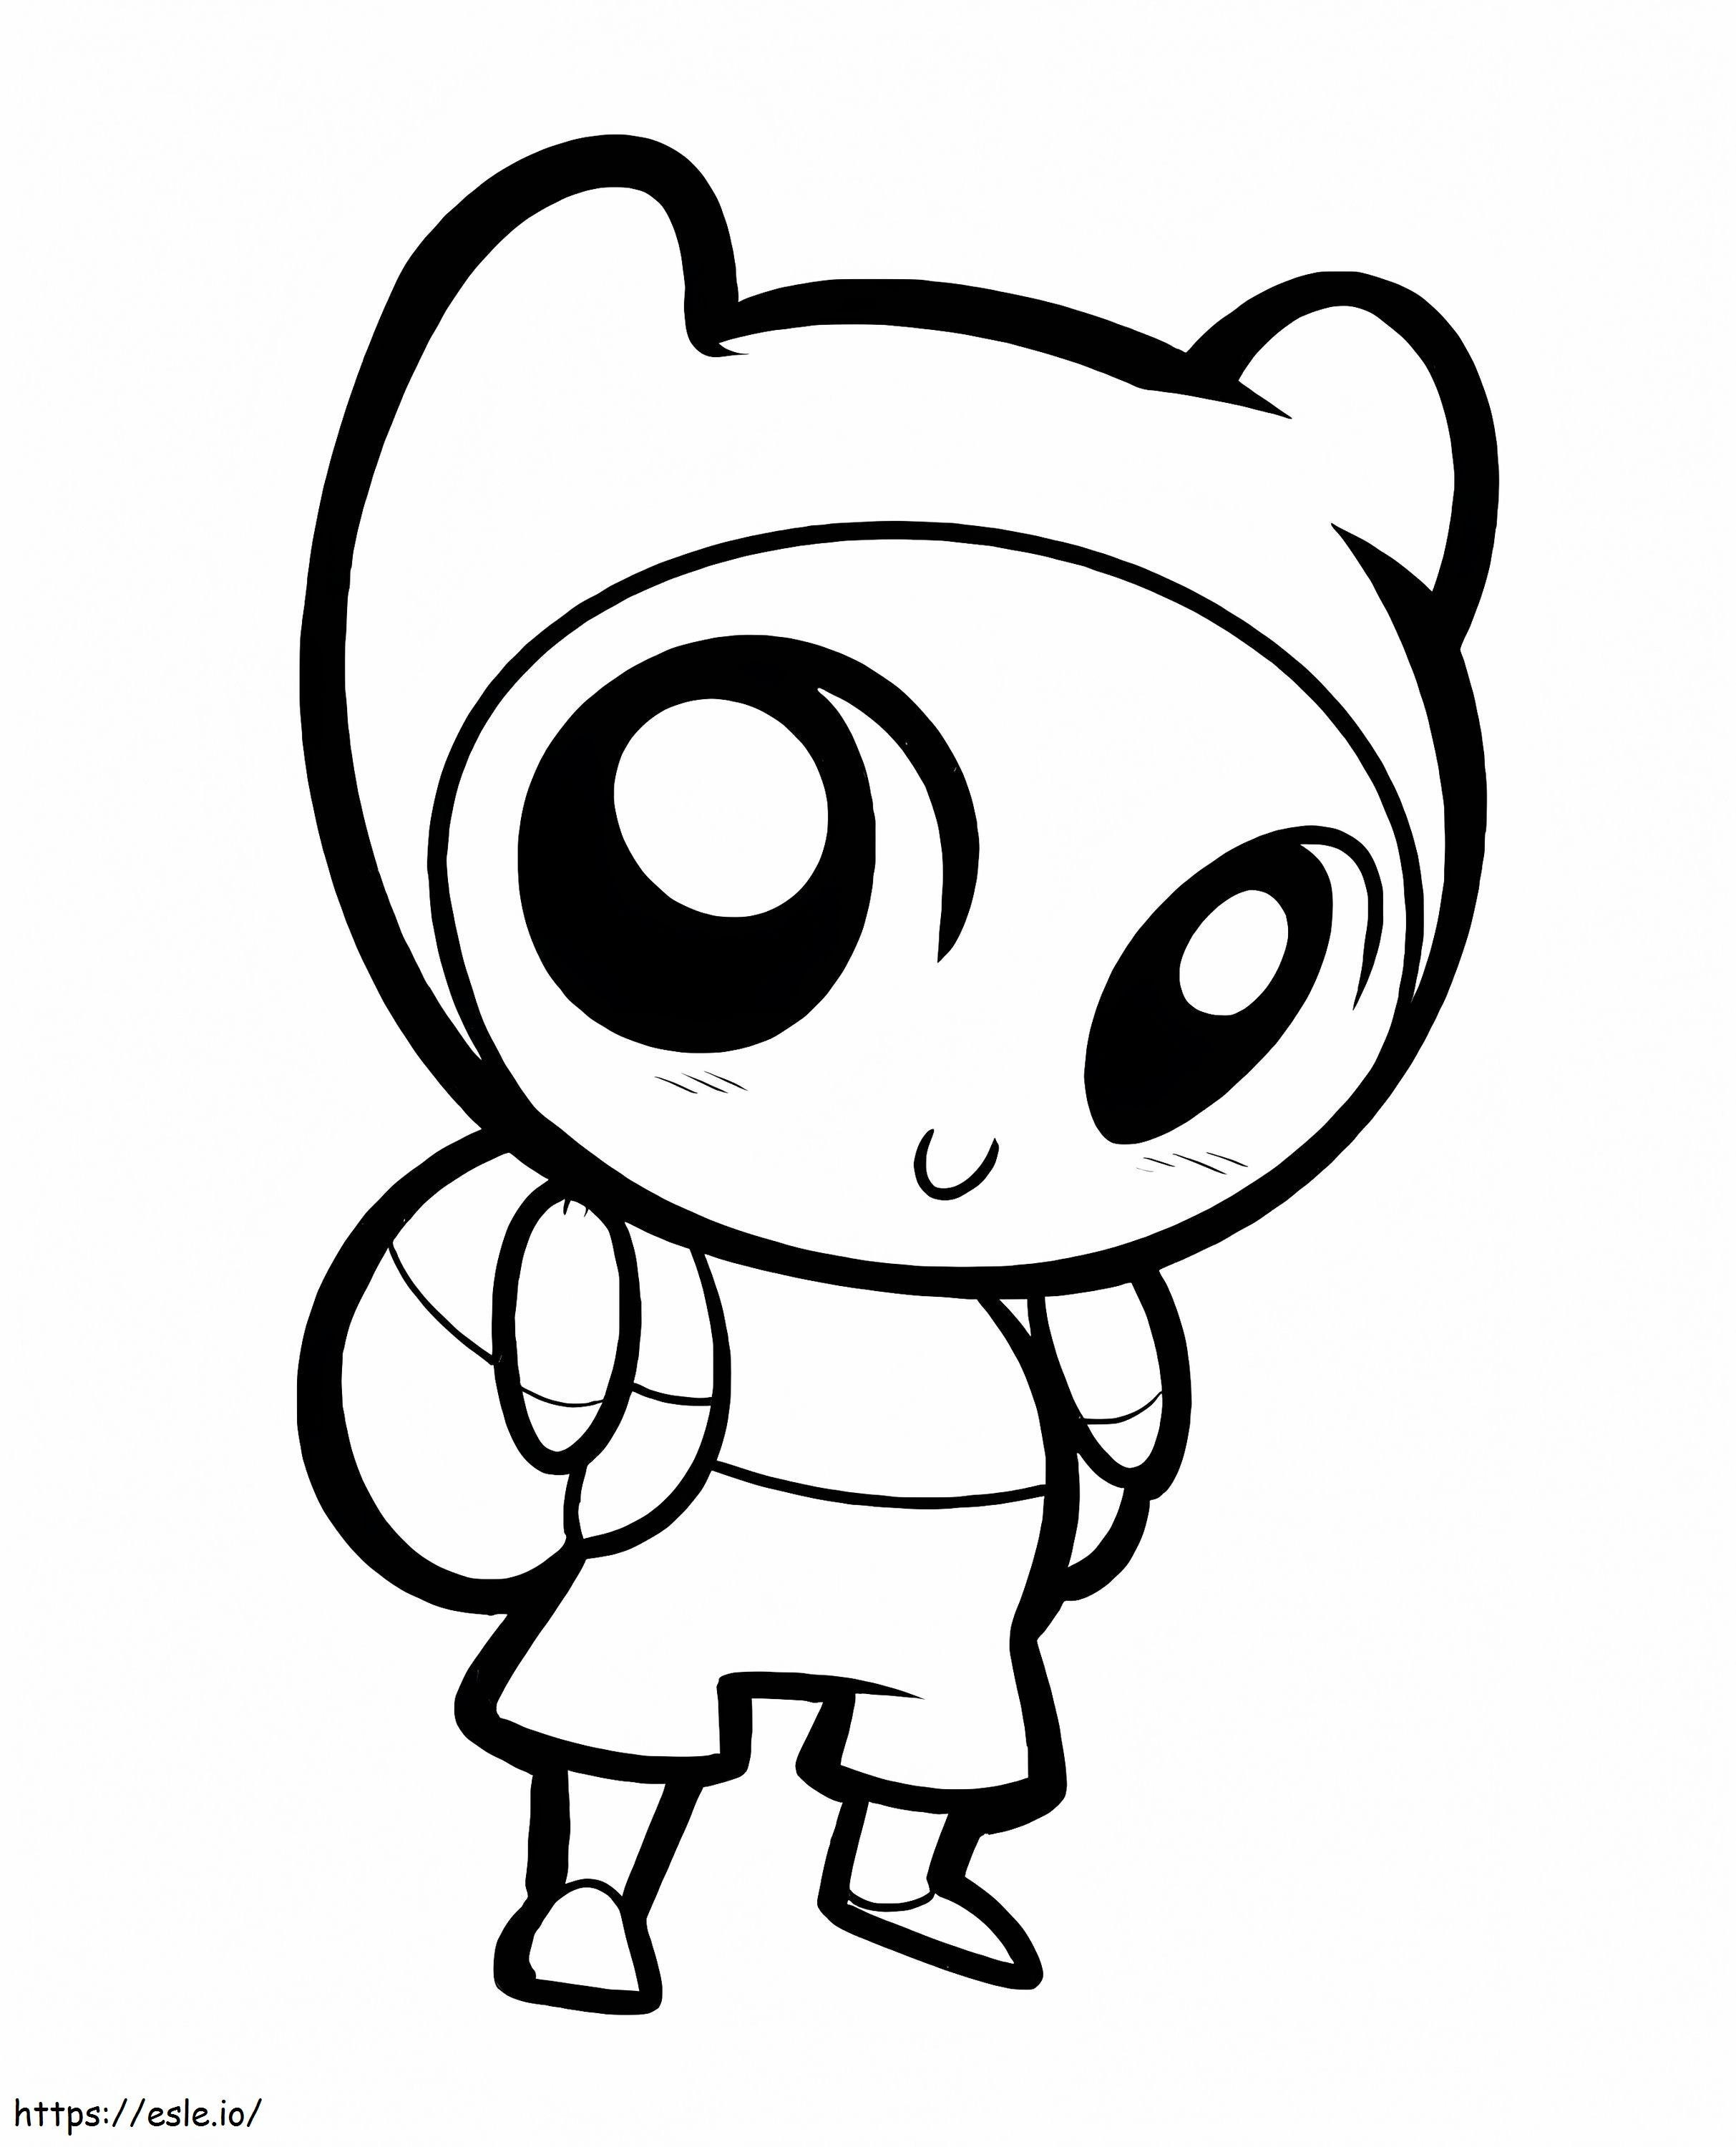 Lovely Chibi Finn coloring page